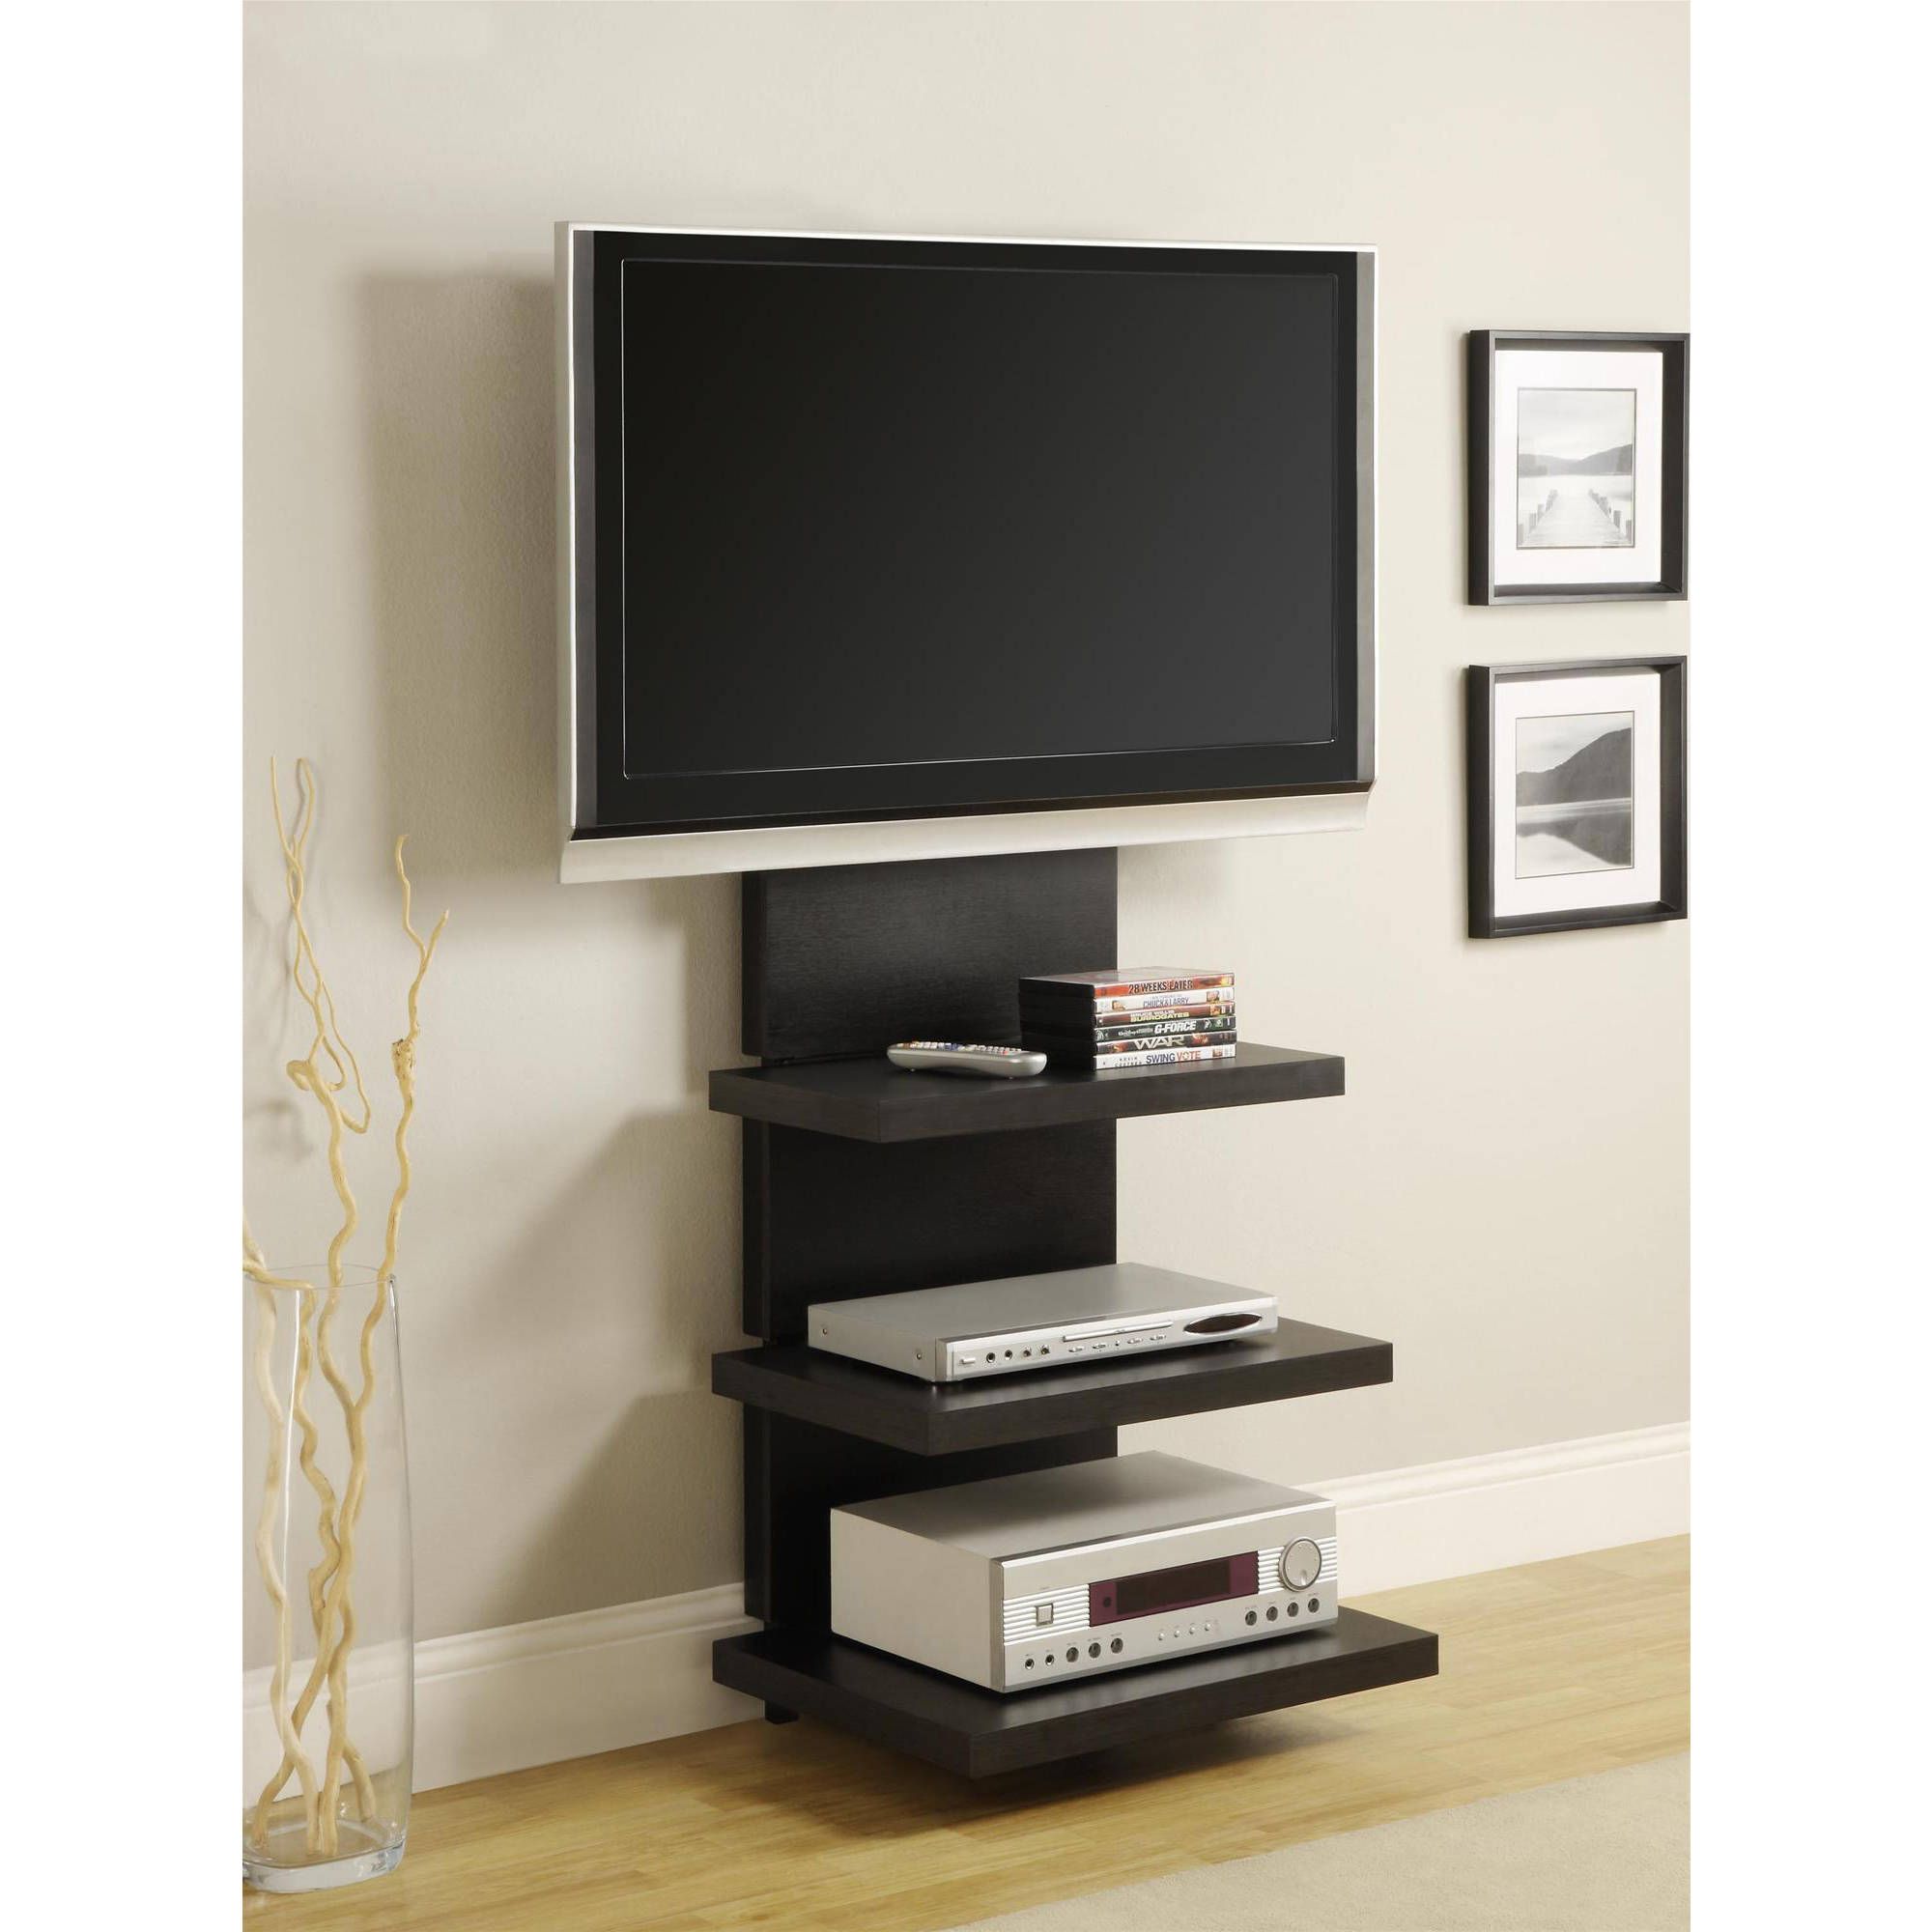 Ameriwood Home Elevation Altramount Tv Stand For Tvs Up To With Modern Wall Mount Tv Stands (View 3 of 15)